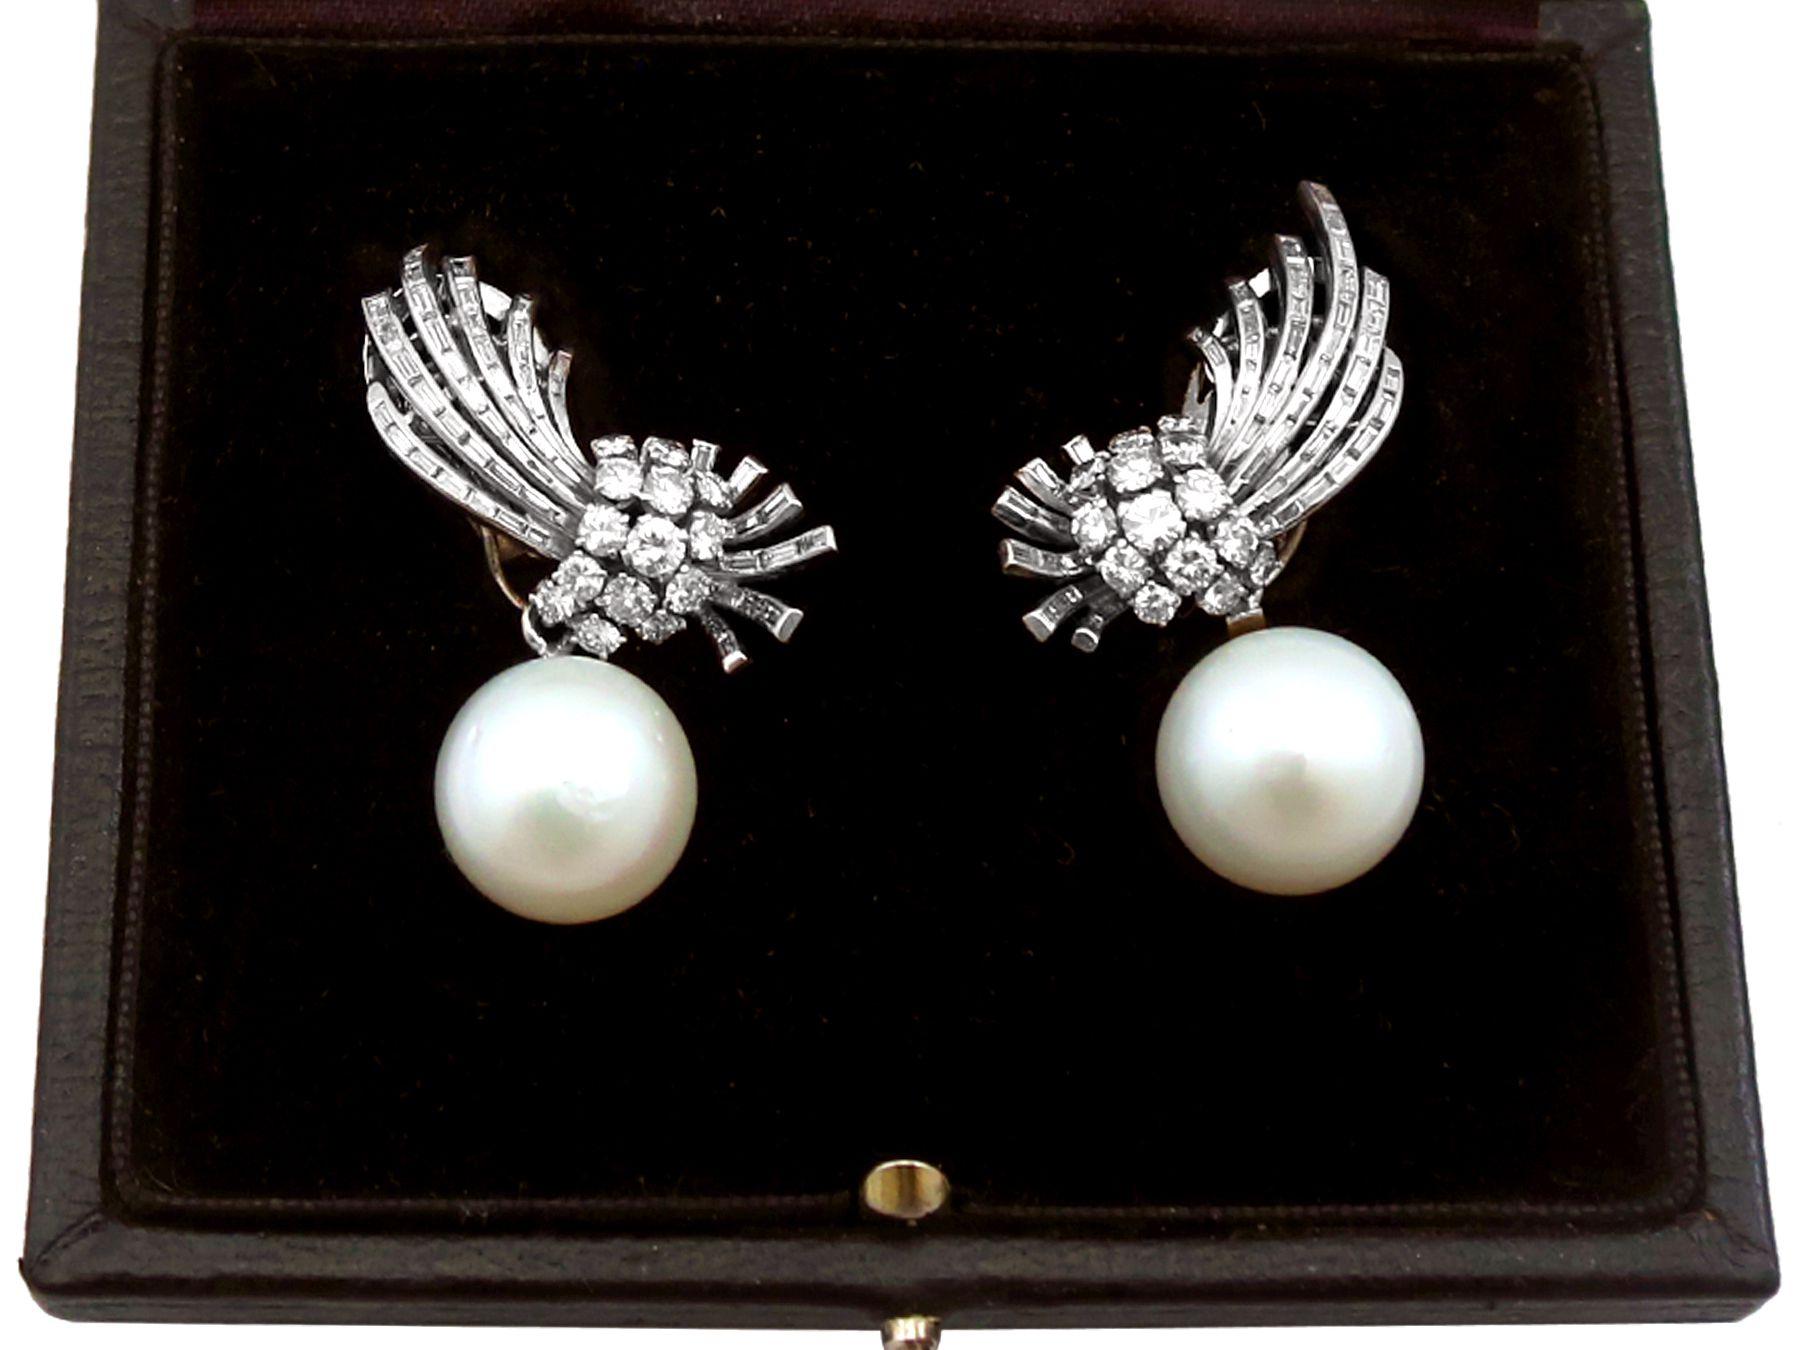 Vintage 3.46Ct Diamond and Cultured Pearl Platinum Earrings, Circa 1950 For Sale 2